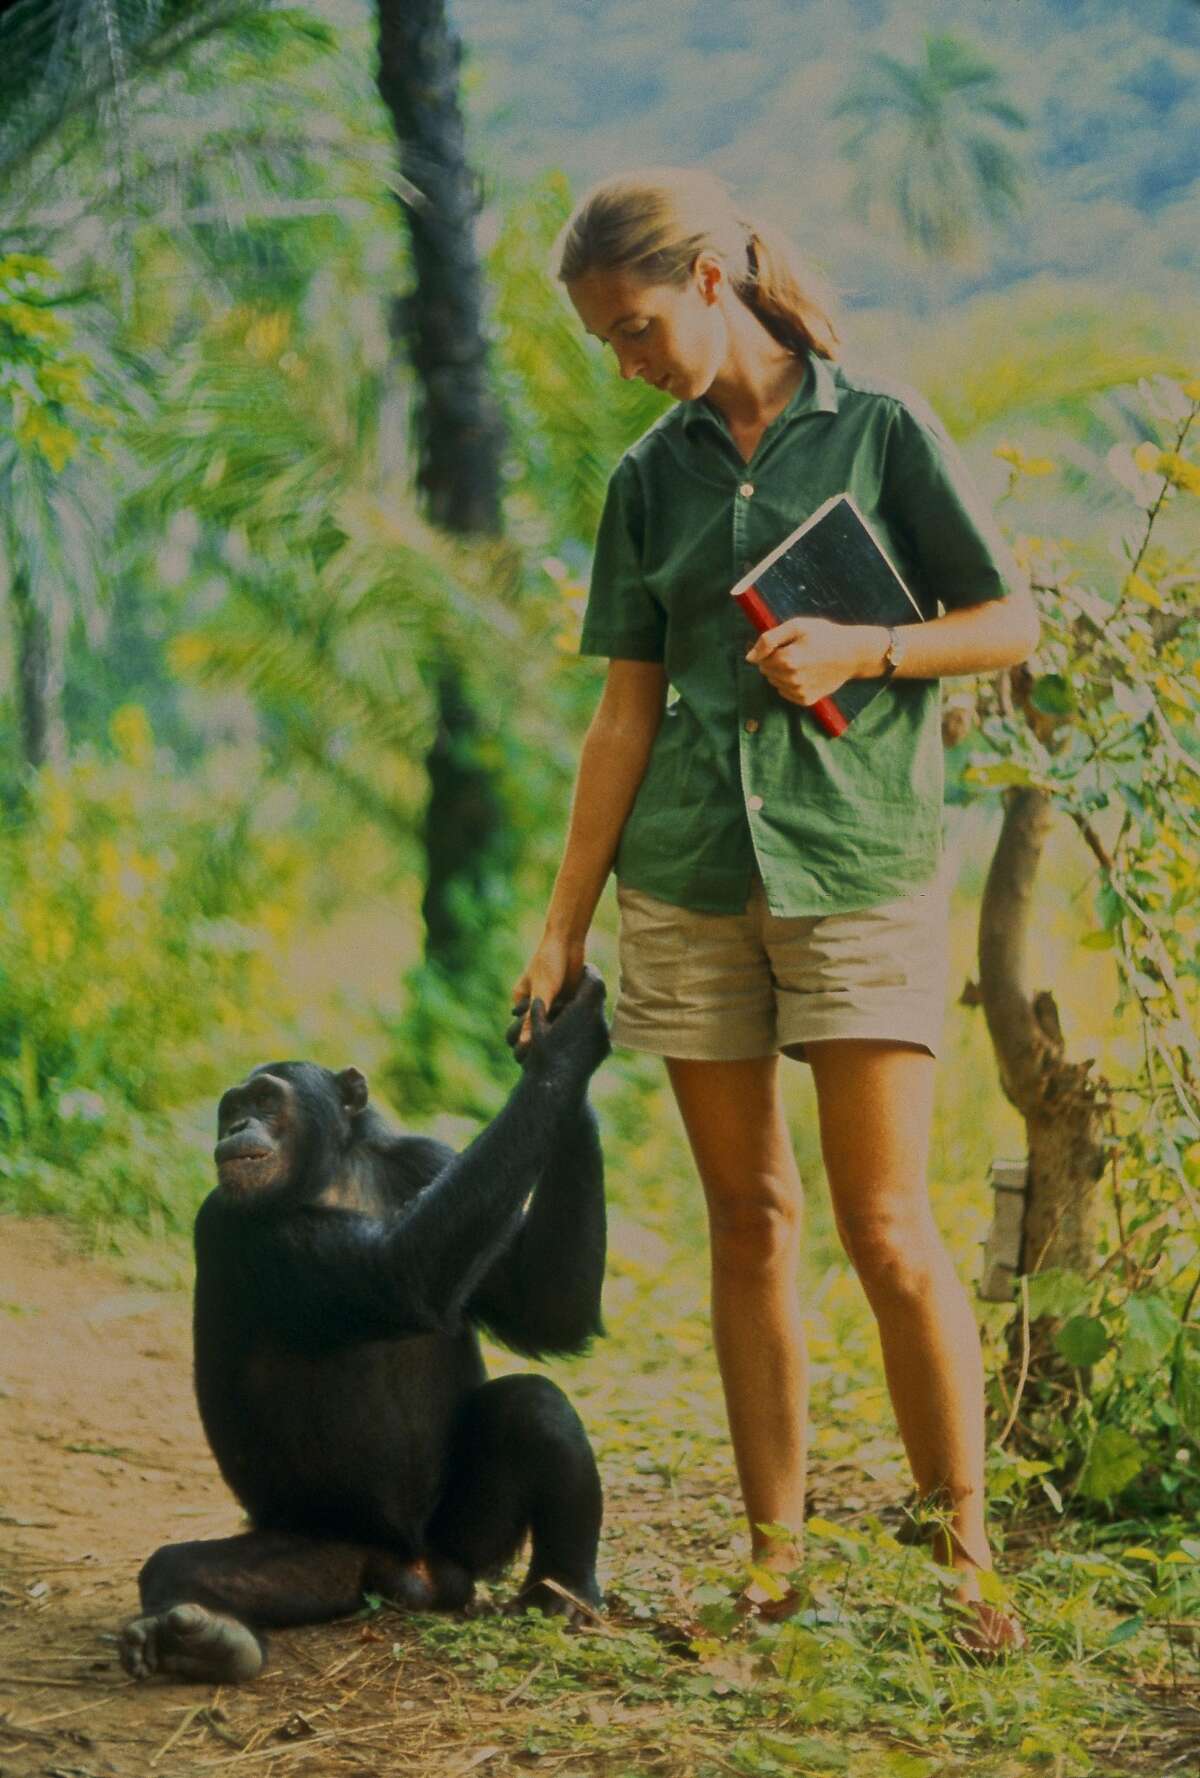 My Life with the Chimpanzees by Jane Goodall